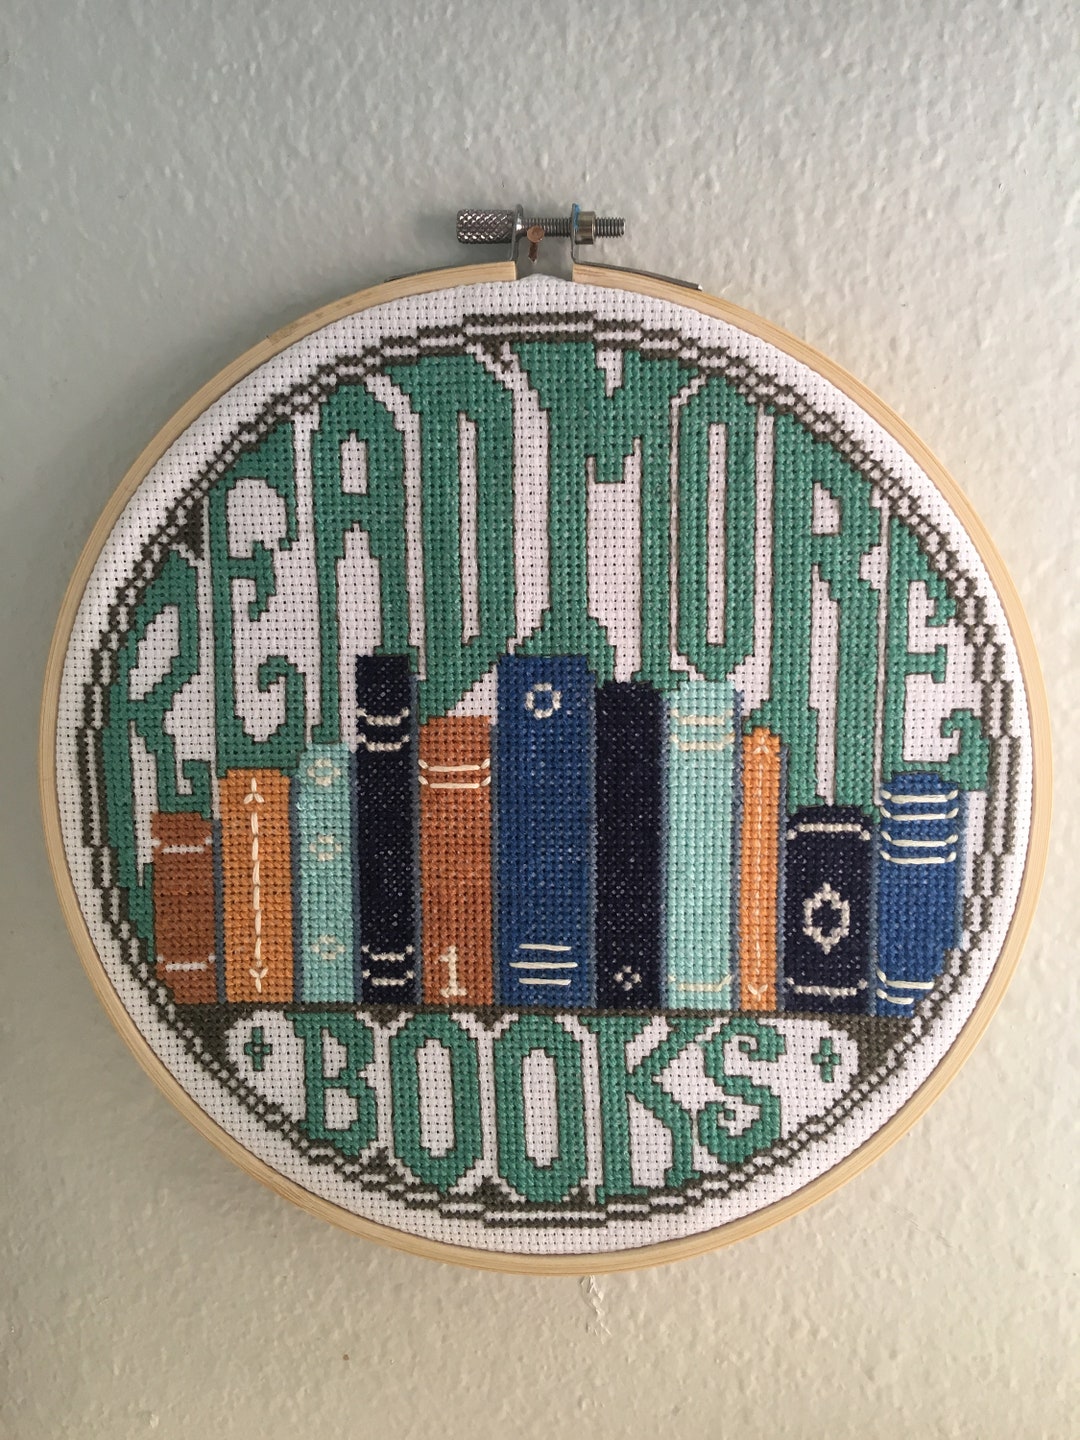 Harry Potter Book Titles Cross Stitch Pattern - Modern on Monticello